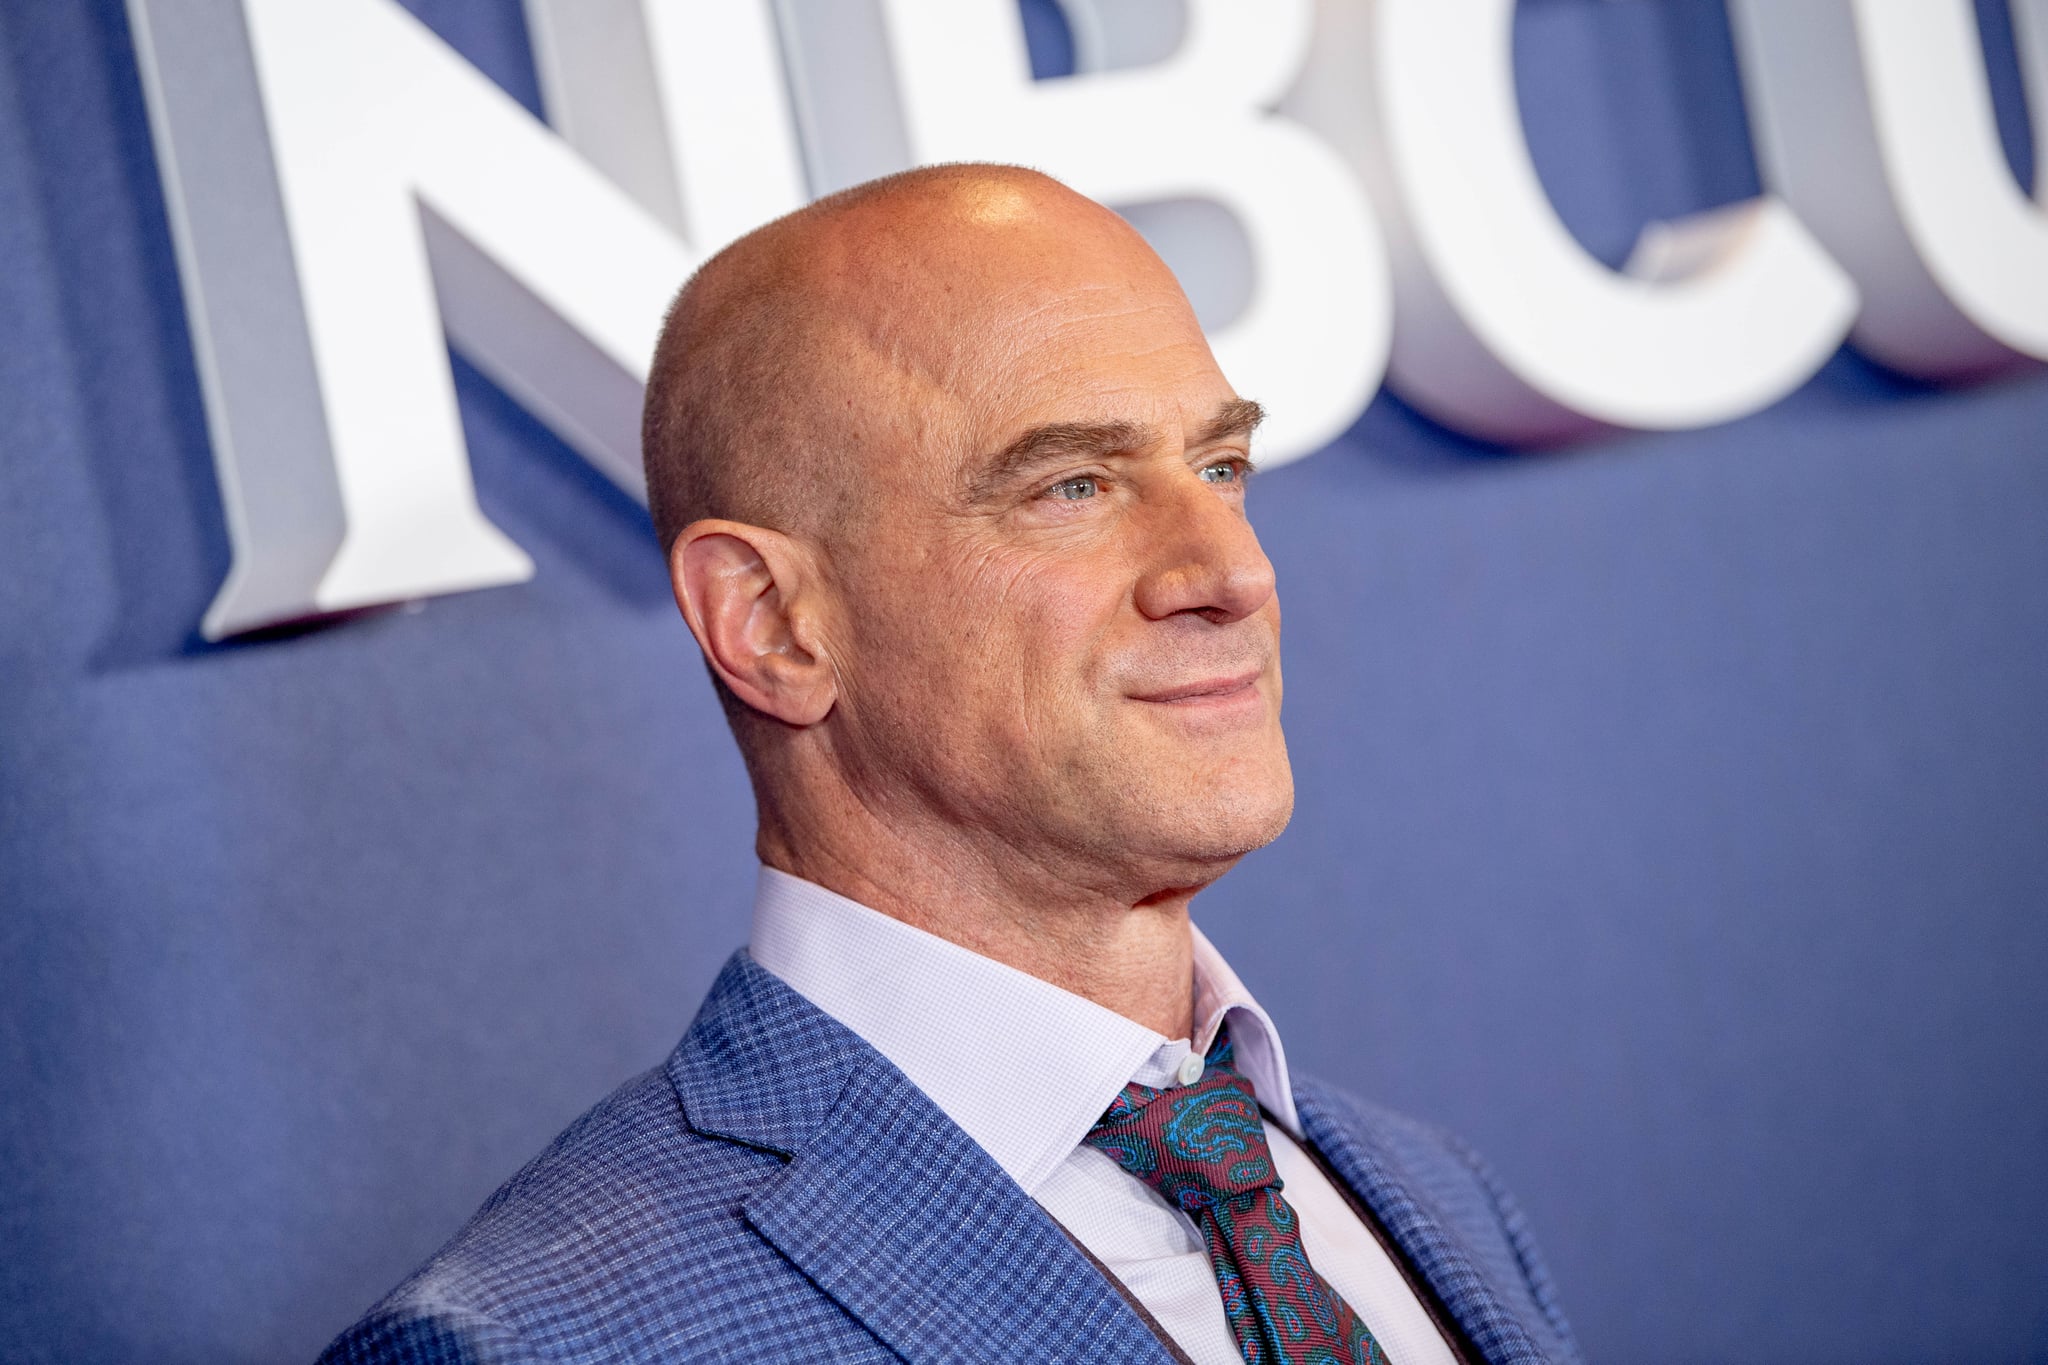 NEW YORK, NEW YORK - MAY 16: Christopher Meloni attends the 2022 NBCUniversal Upfront at Mandarin Oriental Hotel at Radio City Music Hall on May 16, 2022 in New York City. (Photo by Roy Rochlin/Getty Images)